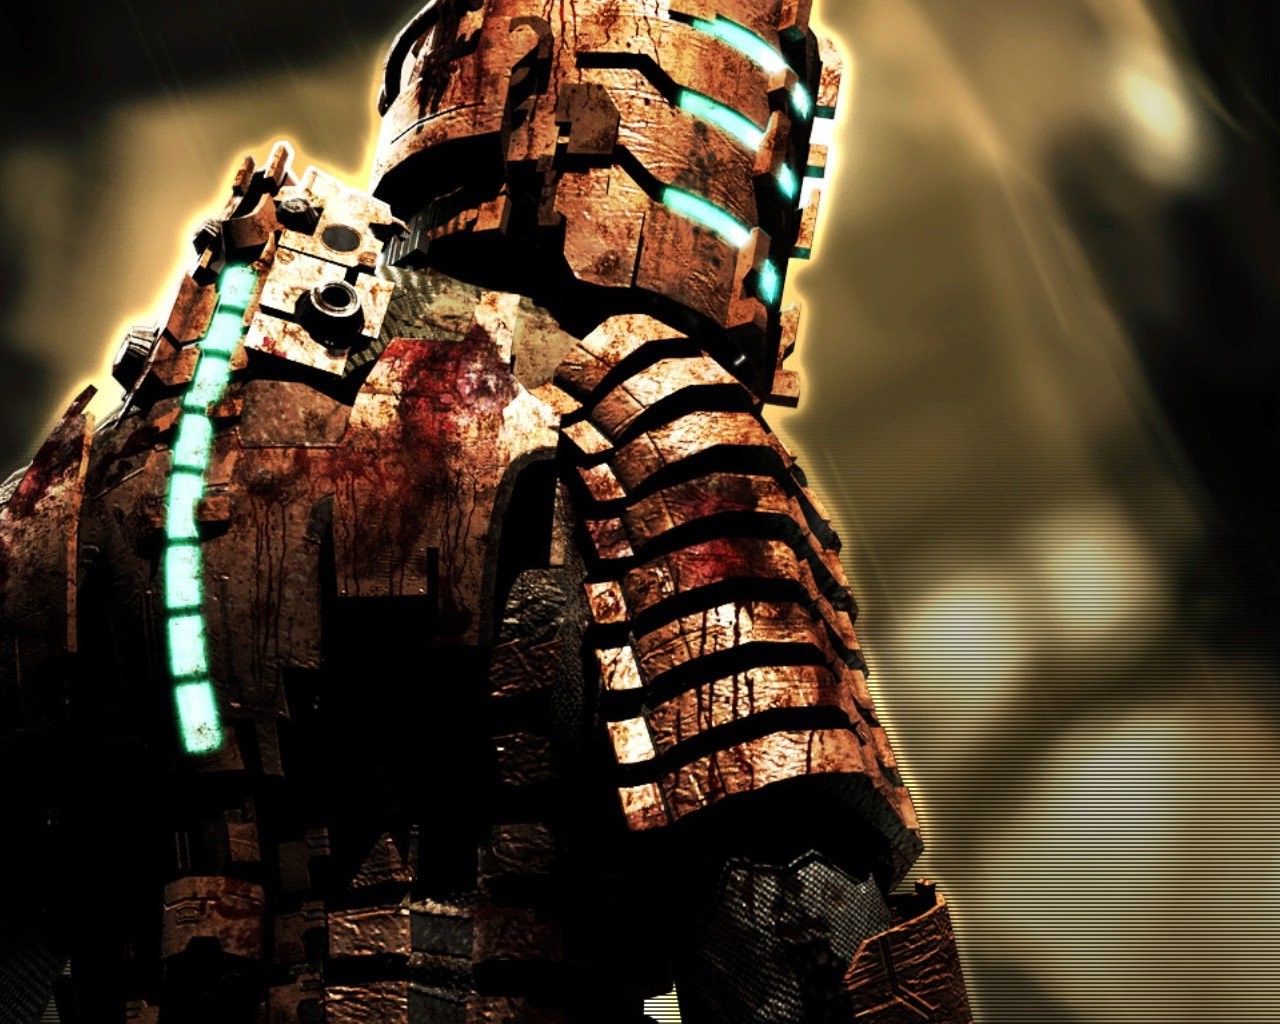 free download isaac clarke dead space